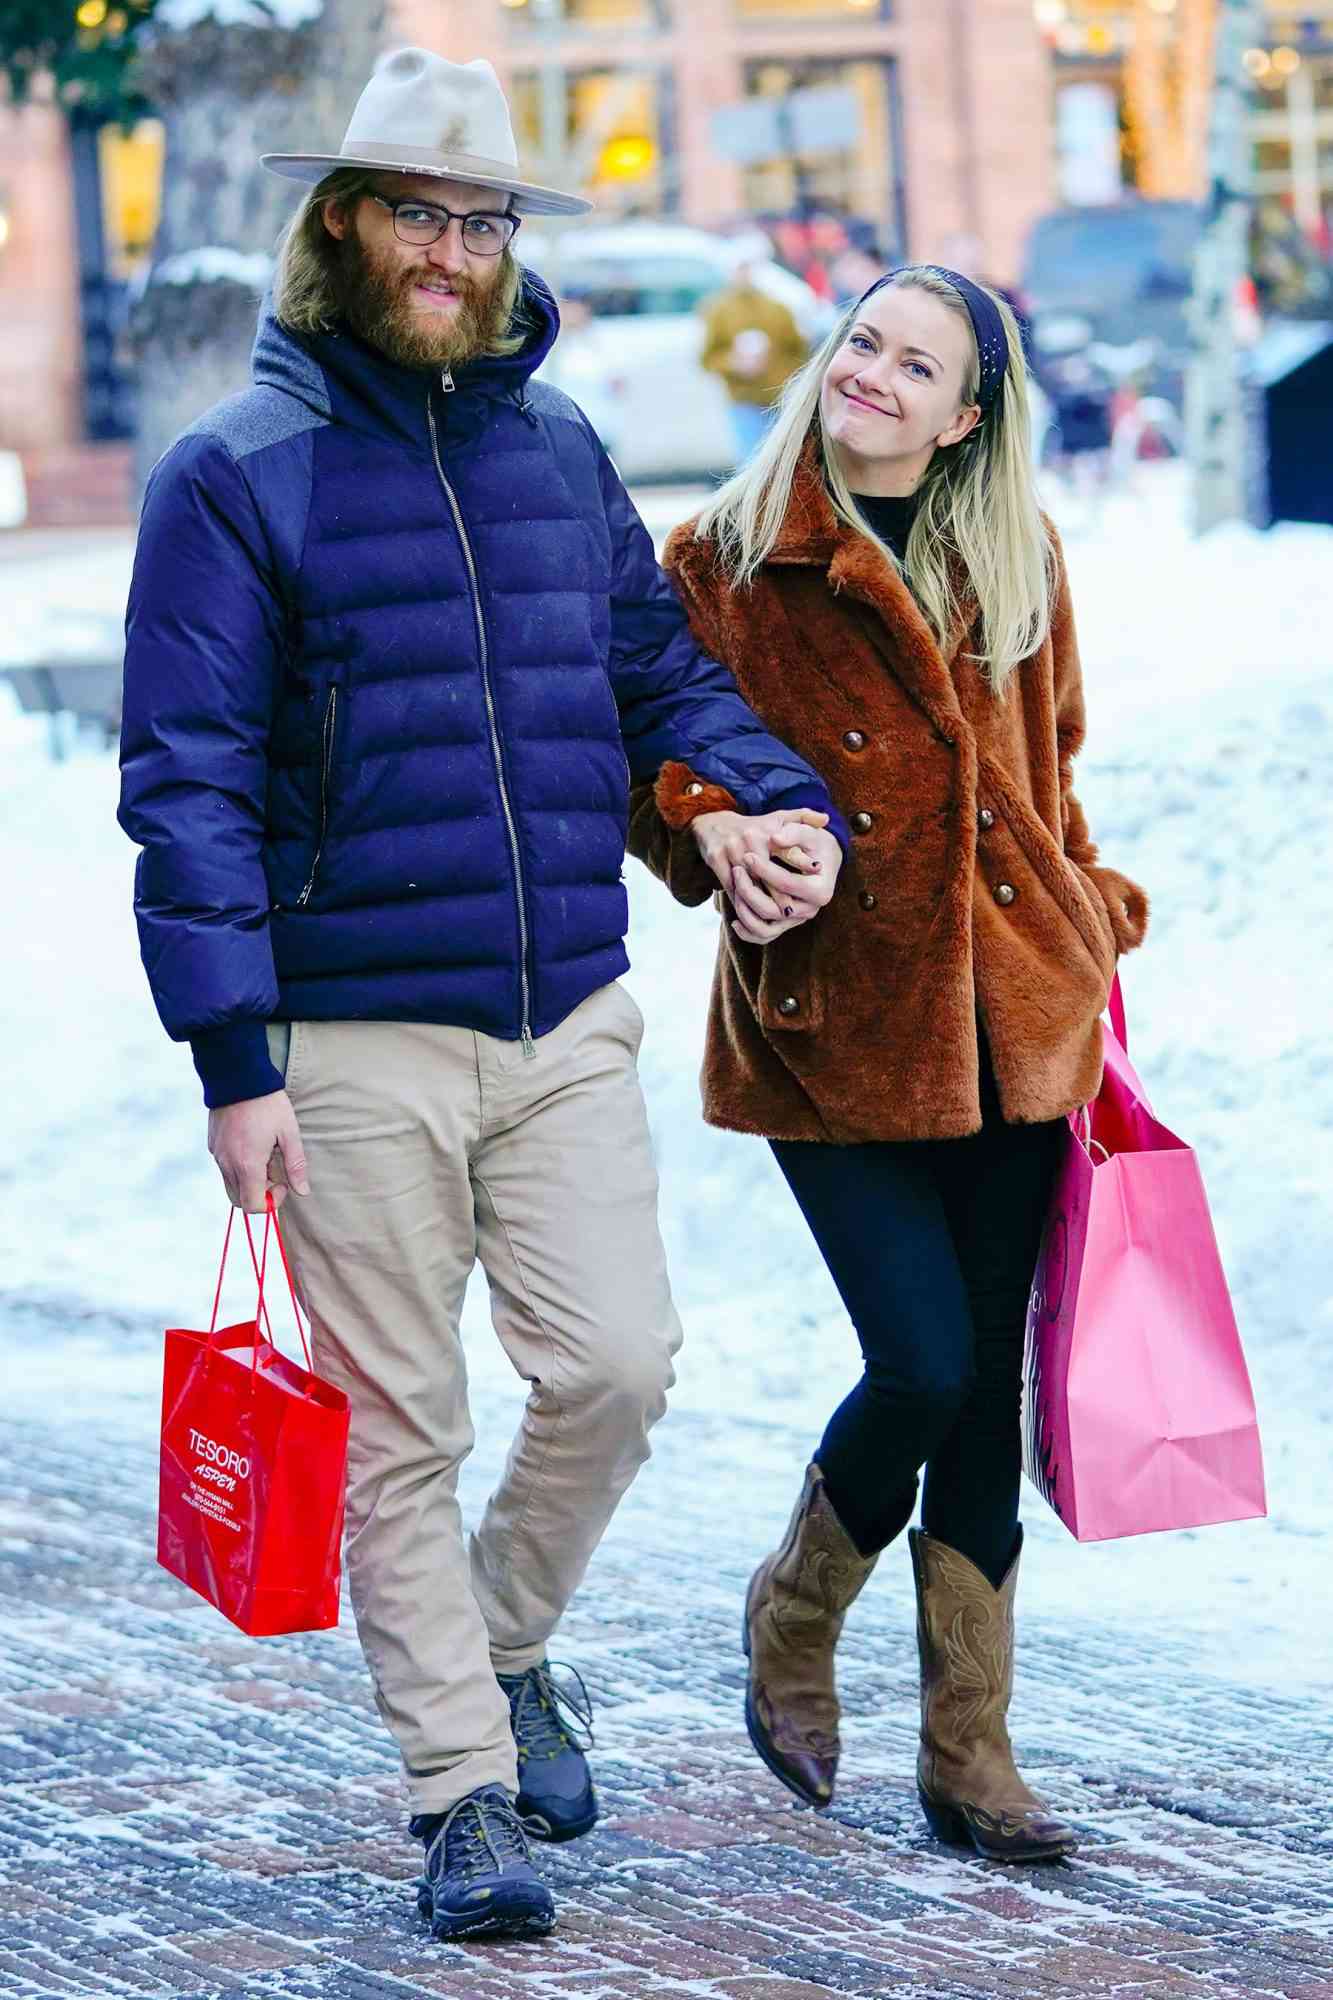 EXCLUSIVE: Wyatt Russell goes shopping in Aspen with girlfriend Meredith Hagner